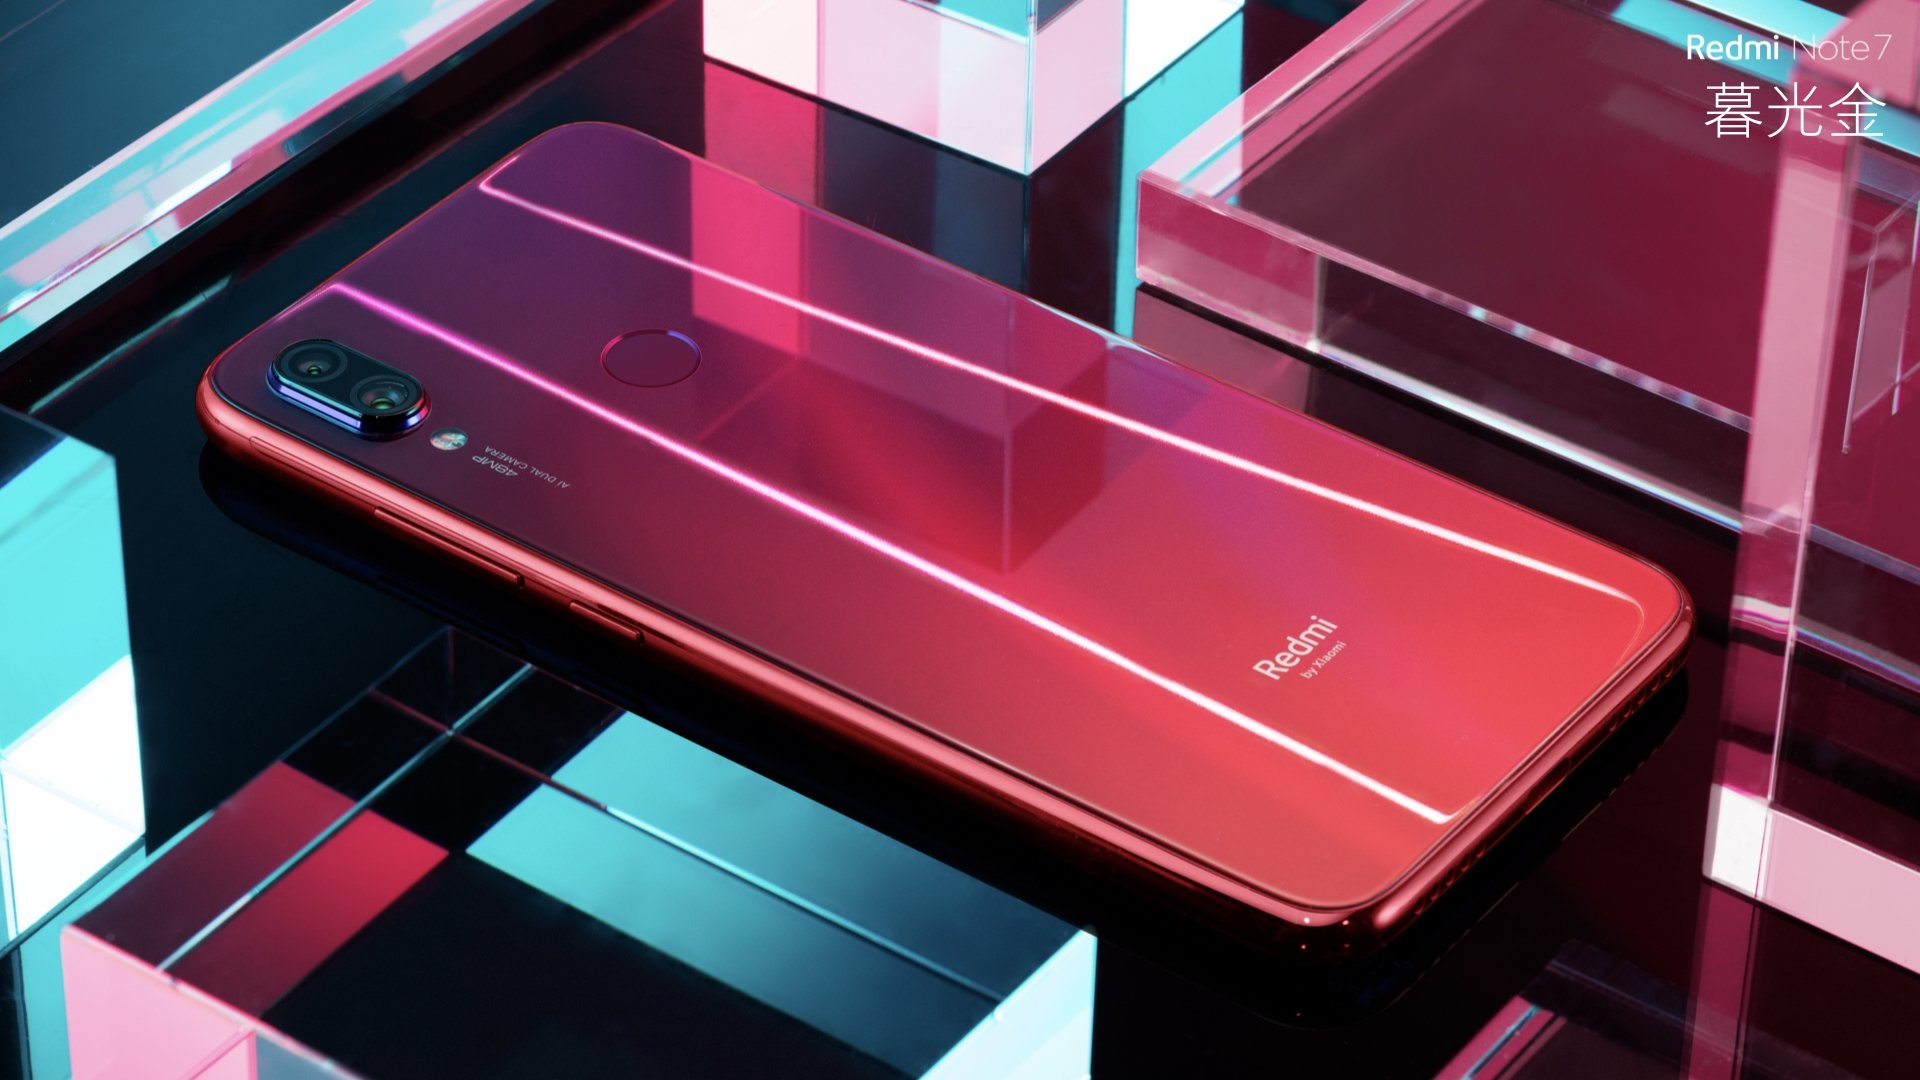 Redmi Note 7 with premium glass body, :9 screen and 48MP camera is now  official for 999 Yuan (~$147) only! - Gizmochina